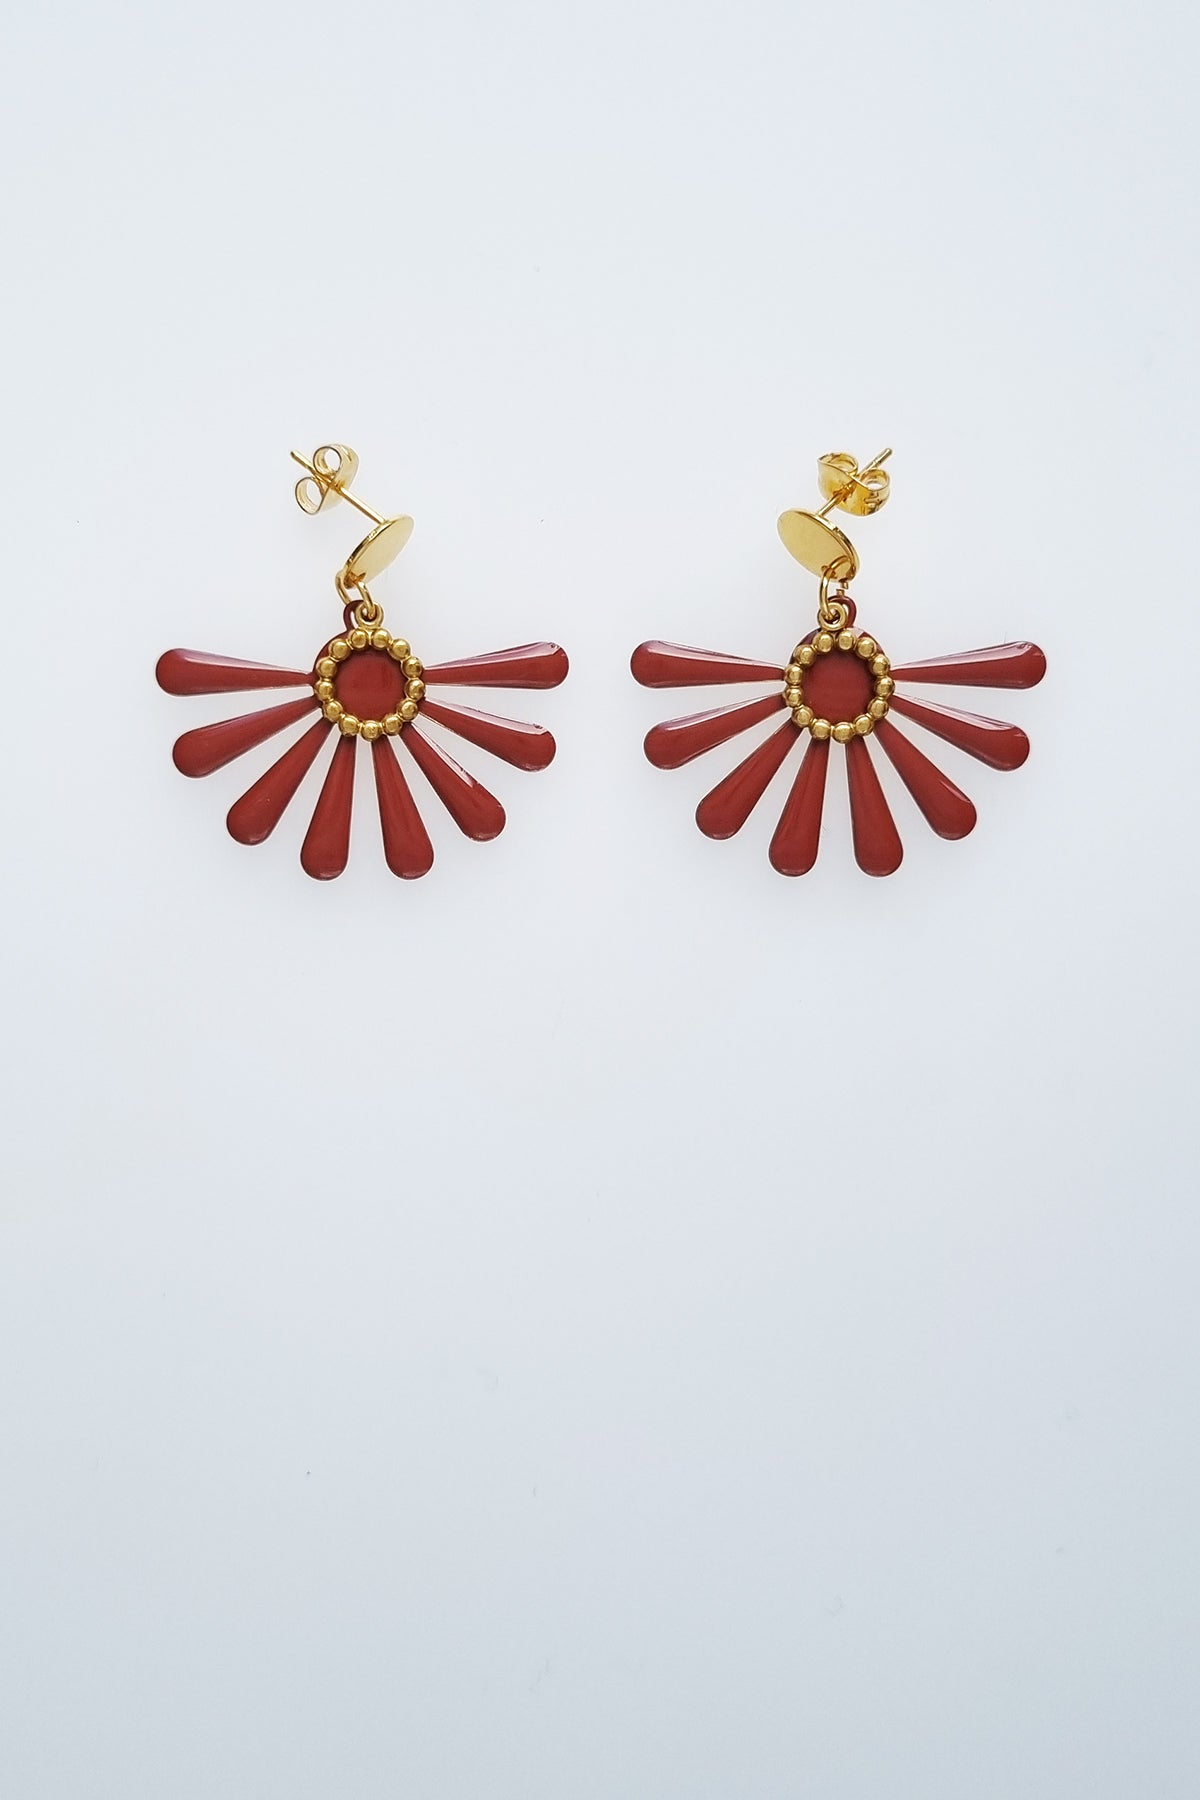 A pair of stud dangle earrings sit against a white background. They feature a chocolate coloured floral enamel shape and a tiny brass ring encircles the disk of the floral enamel piece.